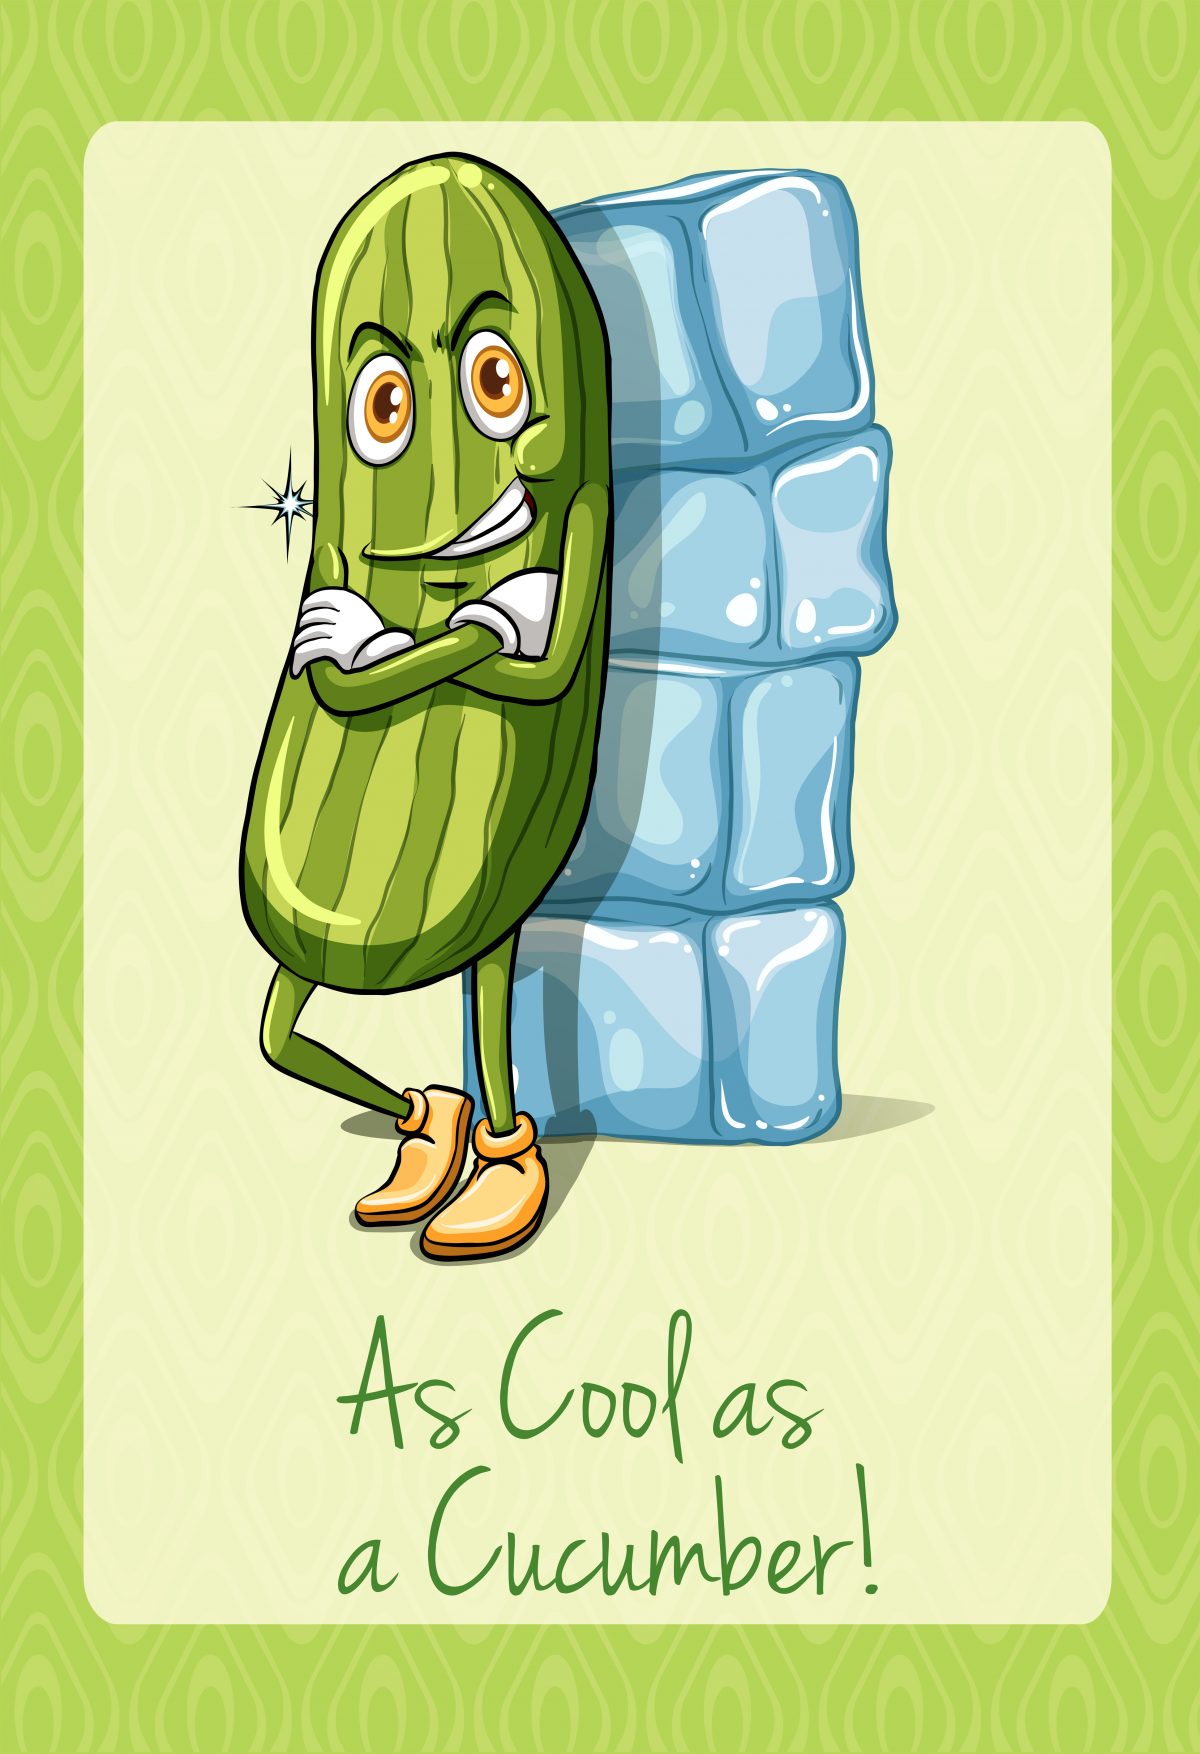 Anglické idiomy - As cool as a cucumber